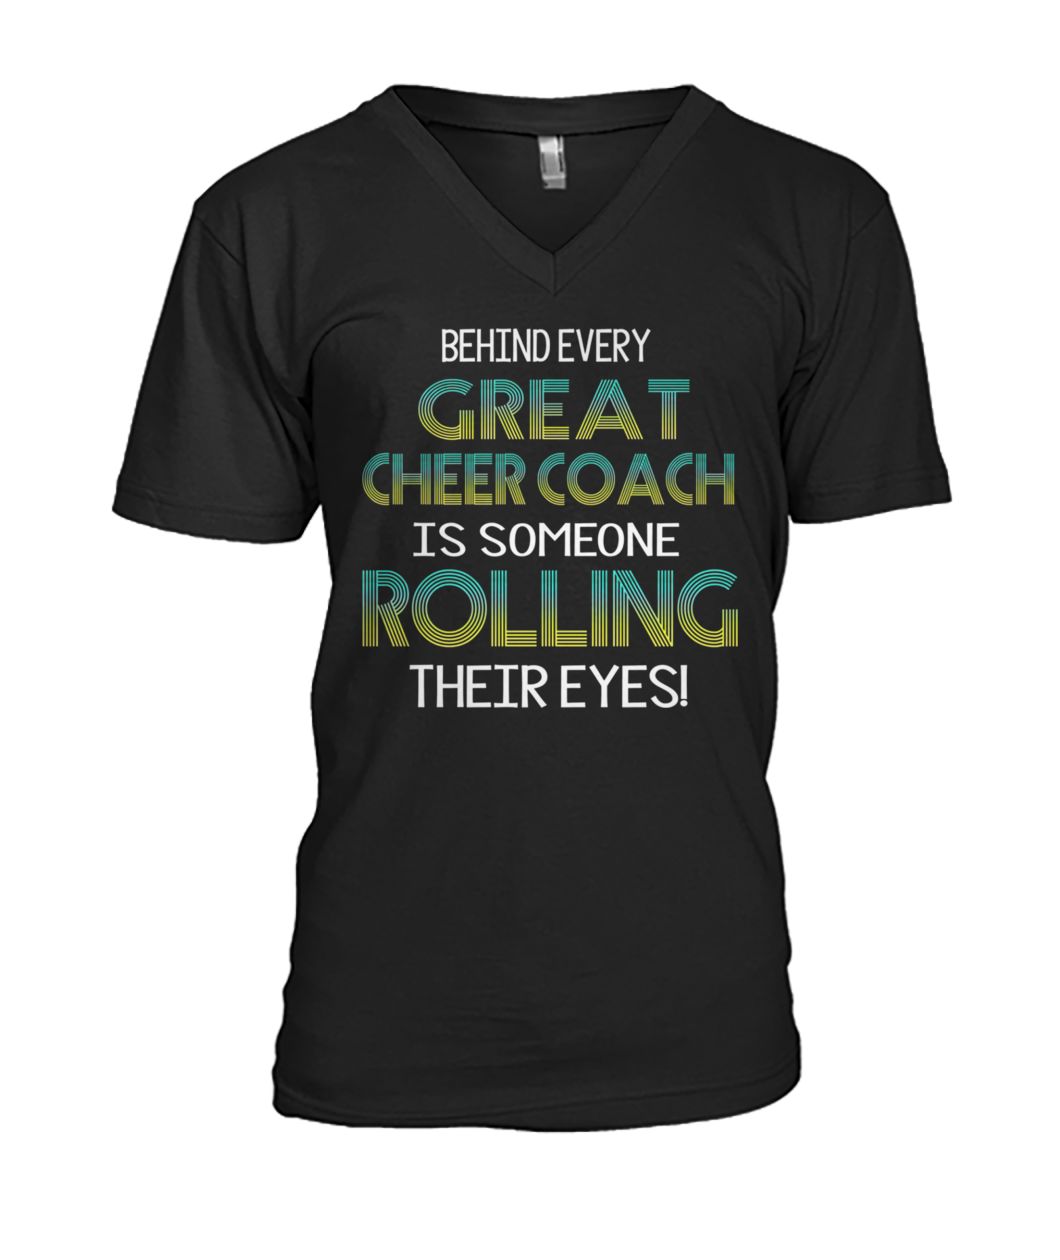 Behind every great cheer coach is someone rolling their eyes mens v-neck